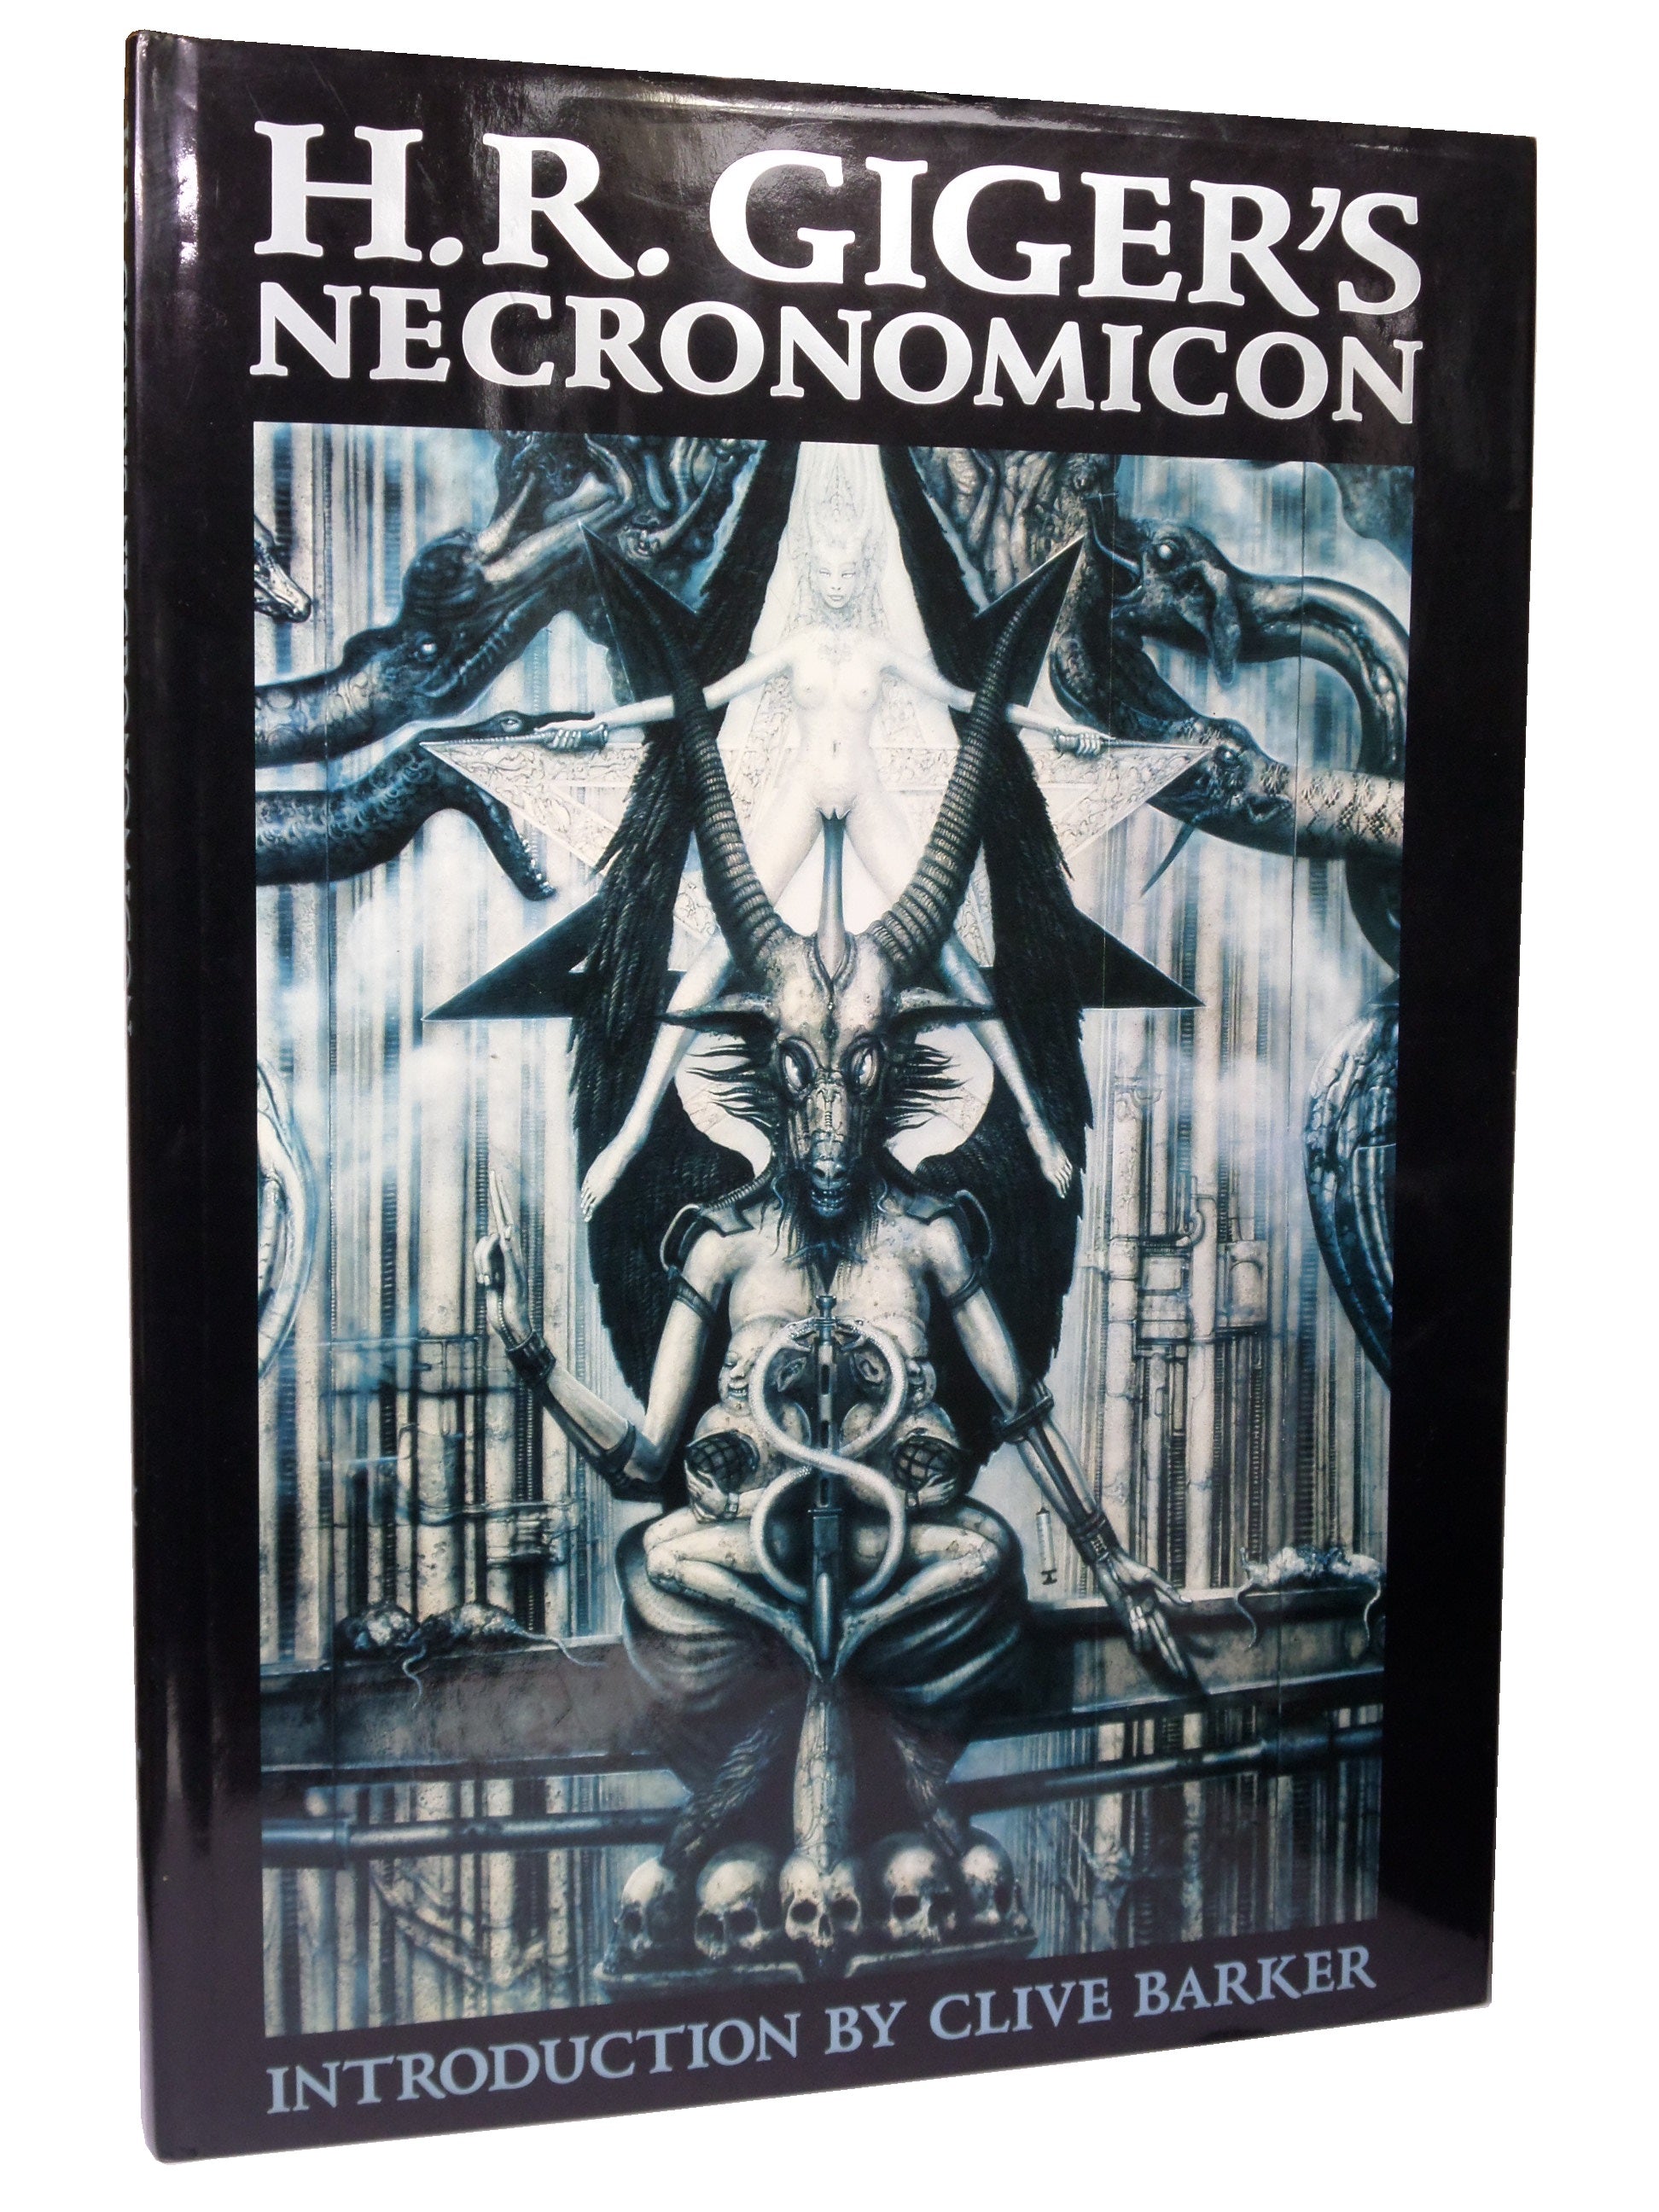 H.R. GIGER'S NECRONOMICON 2001 HARDCOVER WITH DUST JACKET